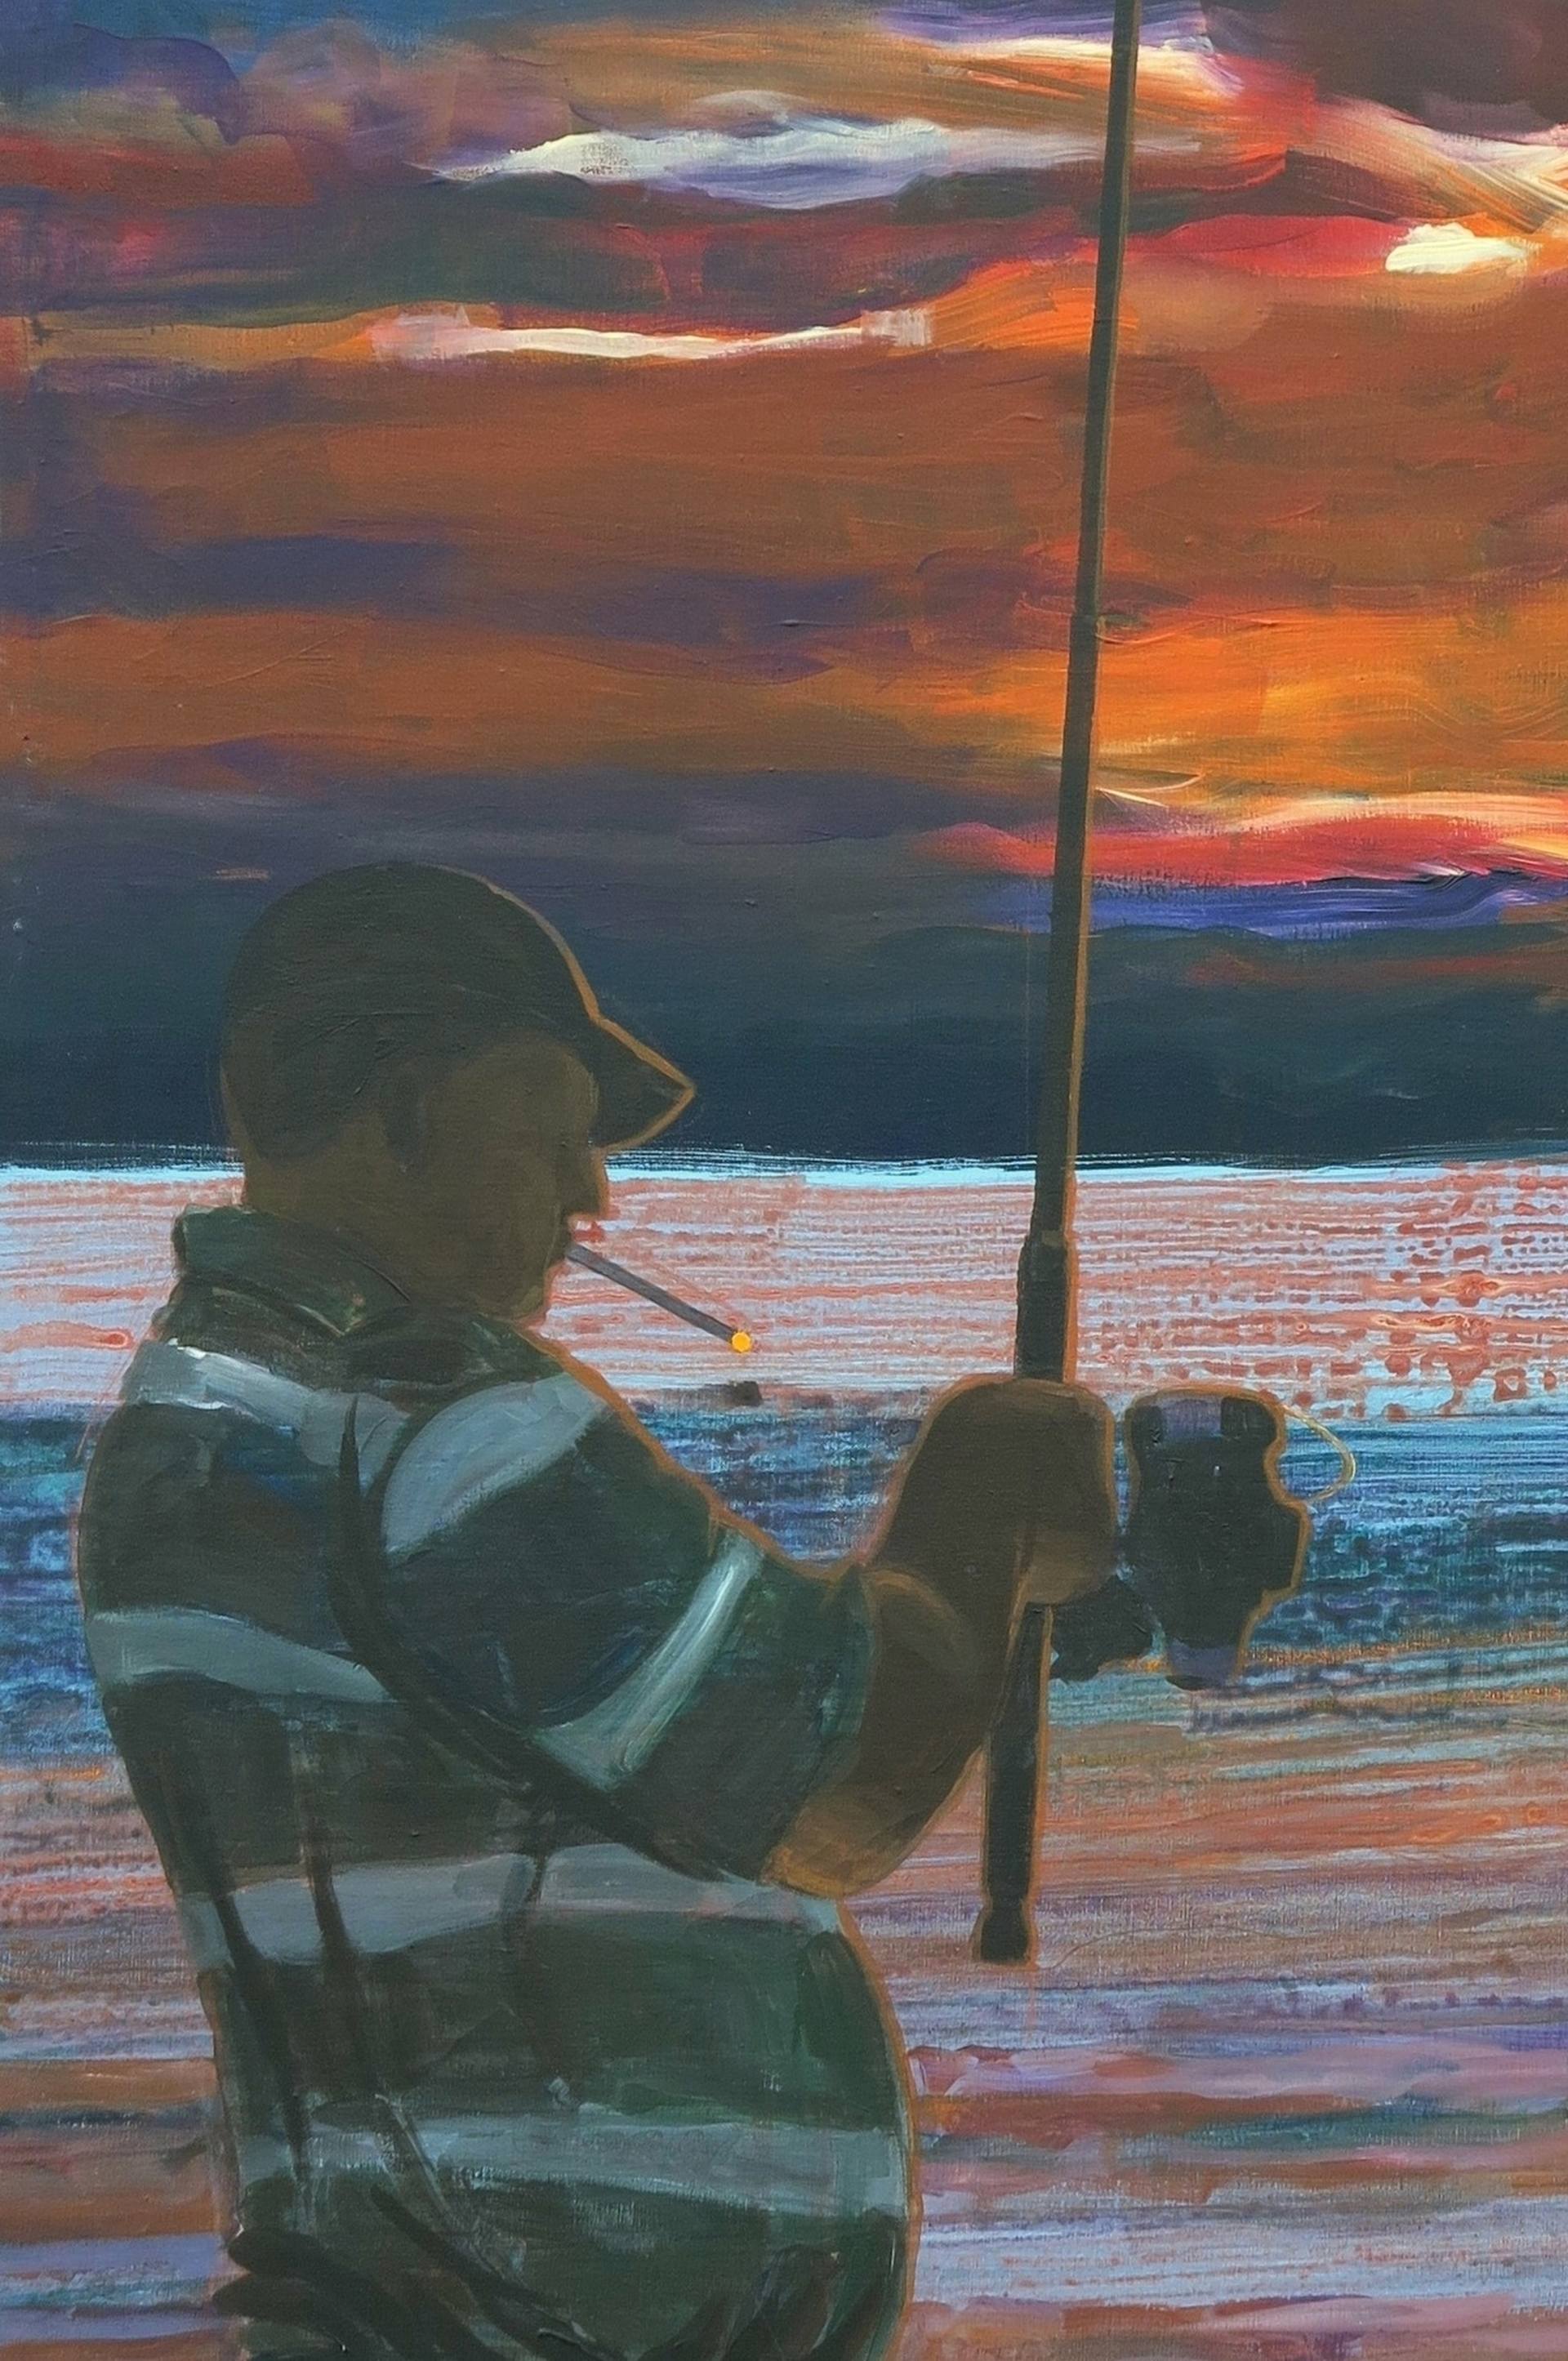 He Likes Fishing at the Sunset in Zaostrog Smoking a Cigarette